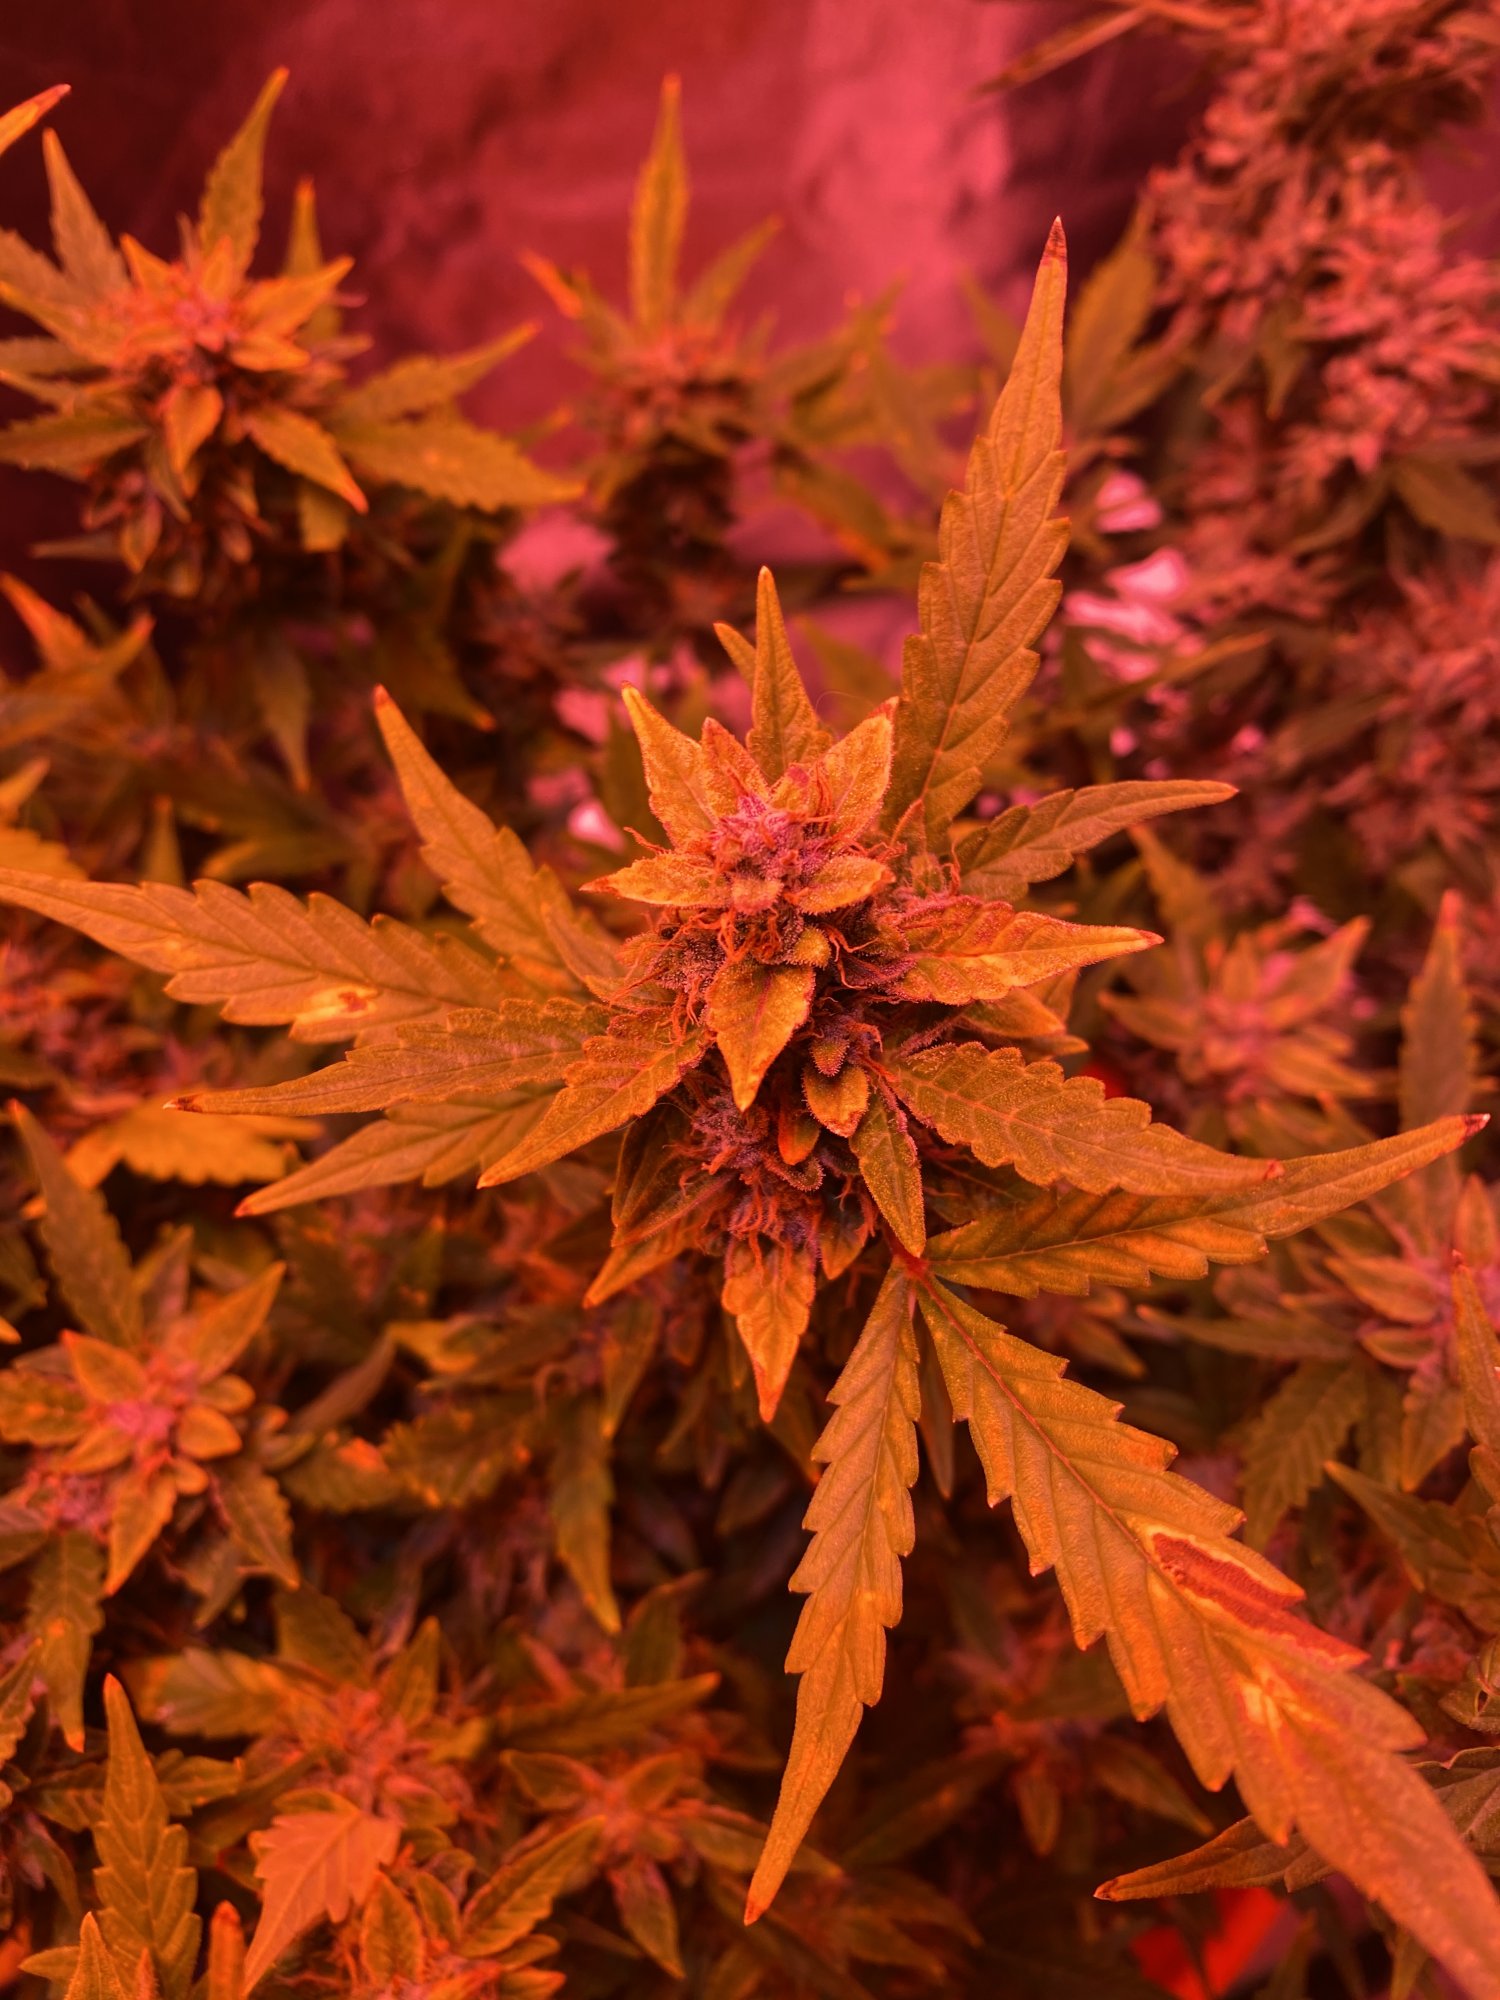 Please help me determine if something is wrong with my gg4 autoflower 4